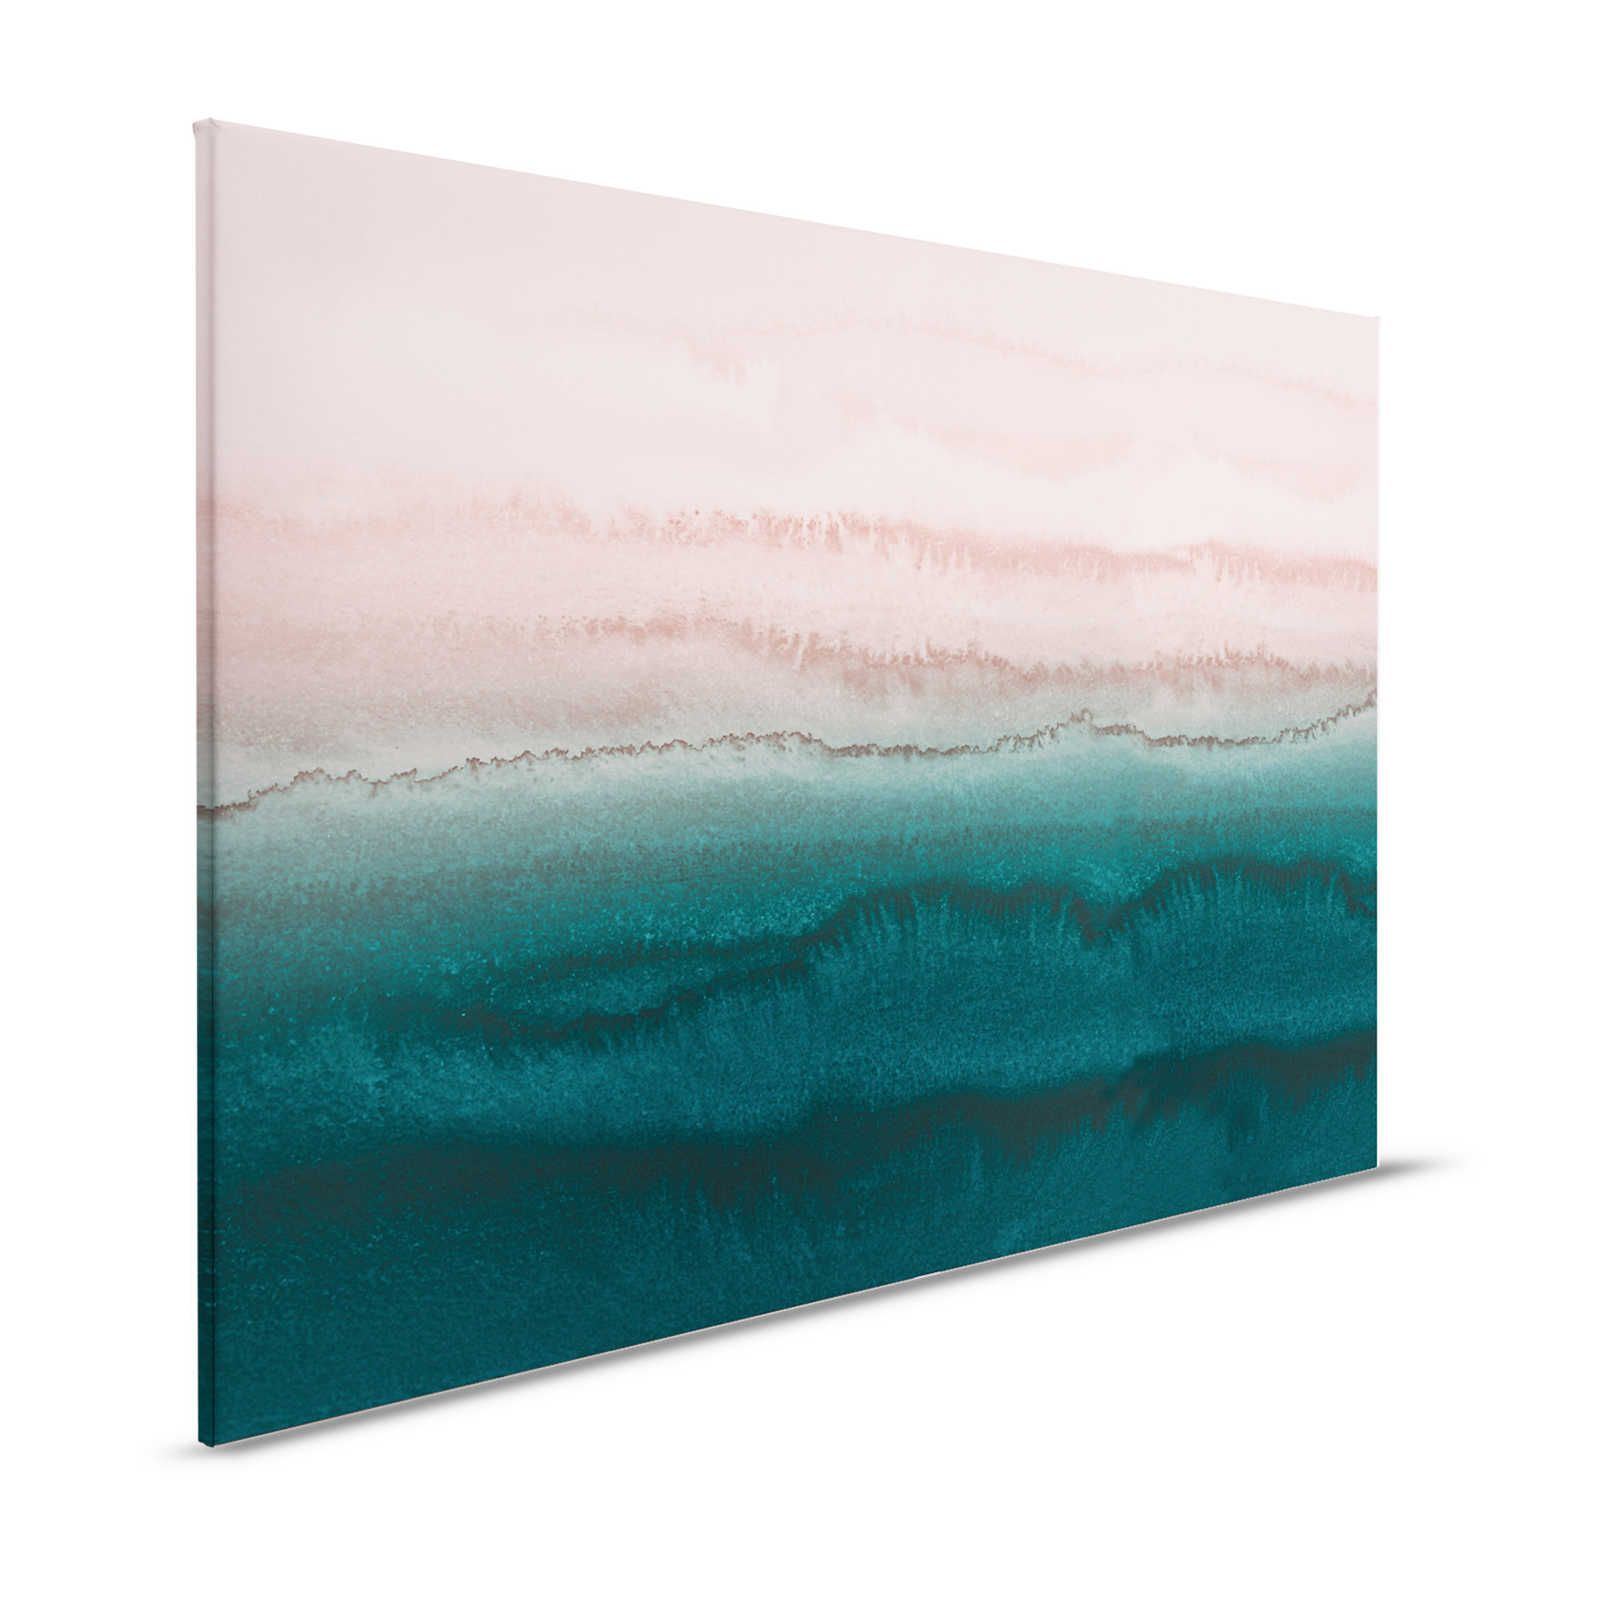 Tides Canvas Painting with Abstract Watercolour - 1.20 m x 0.80 m
